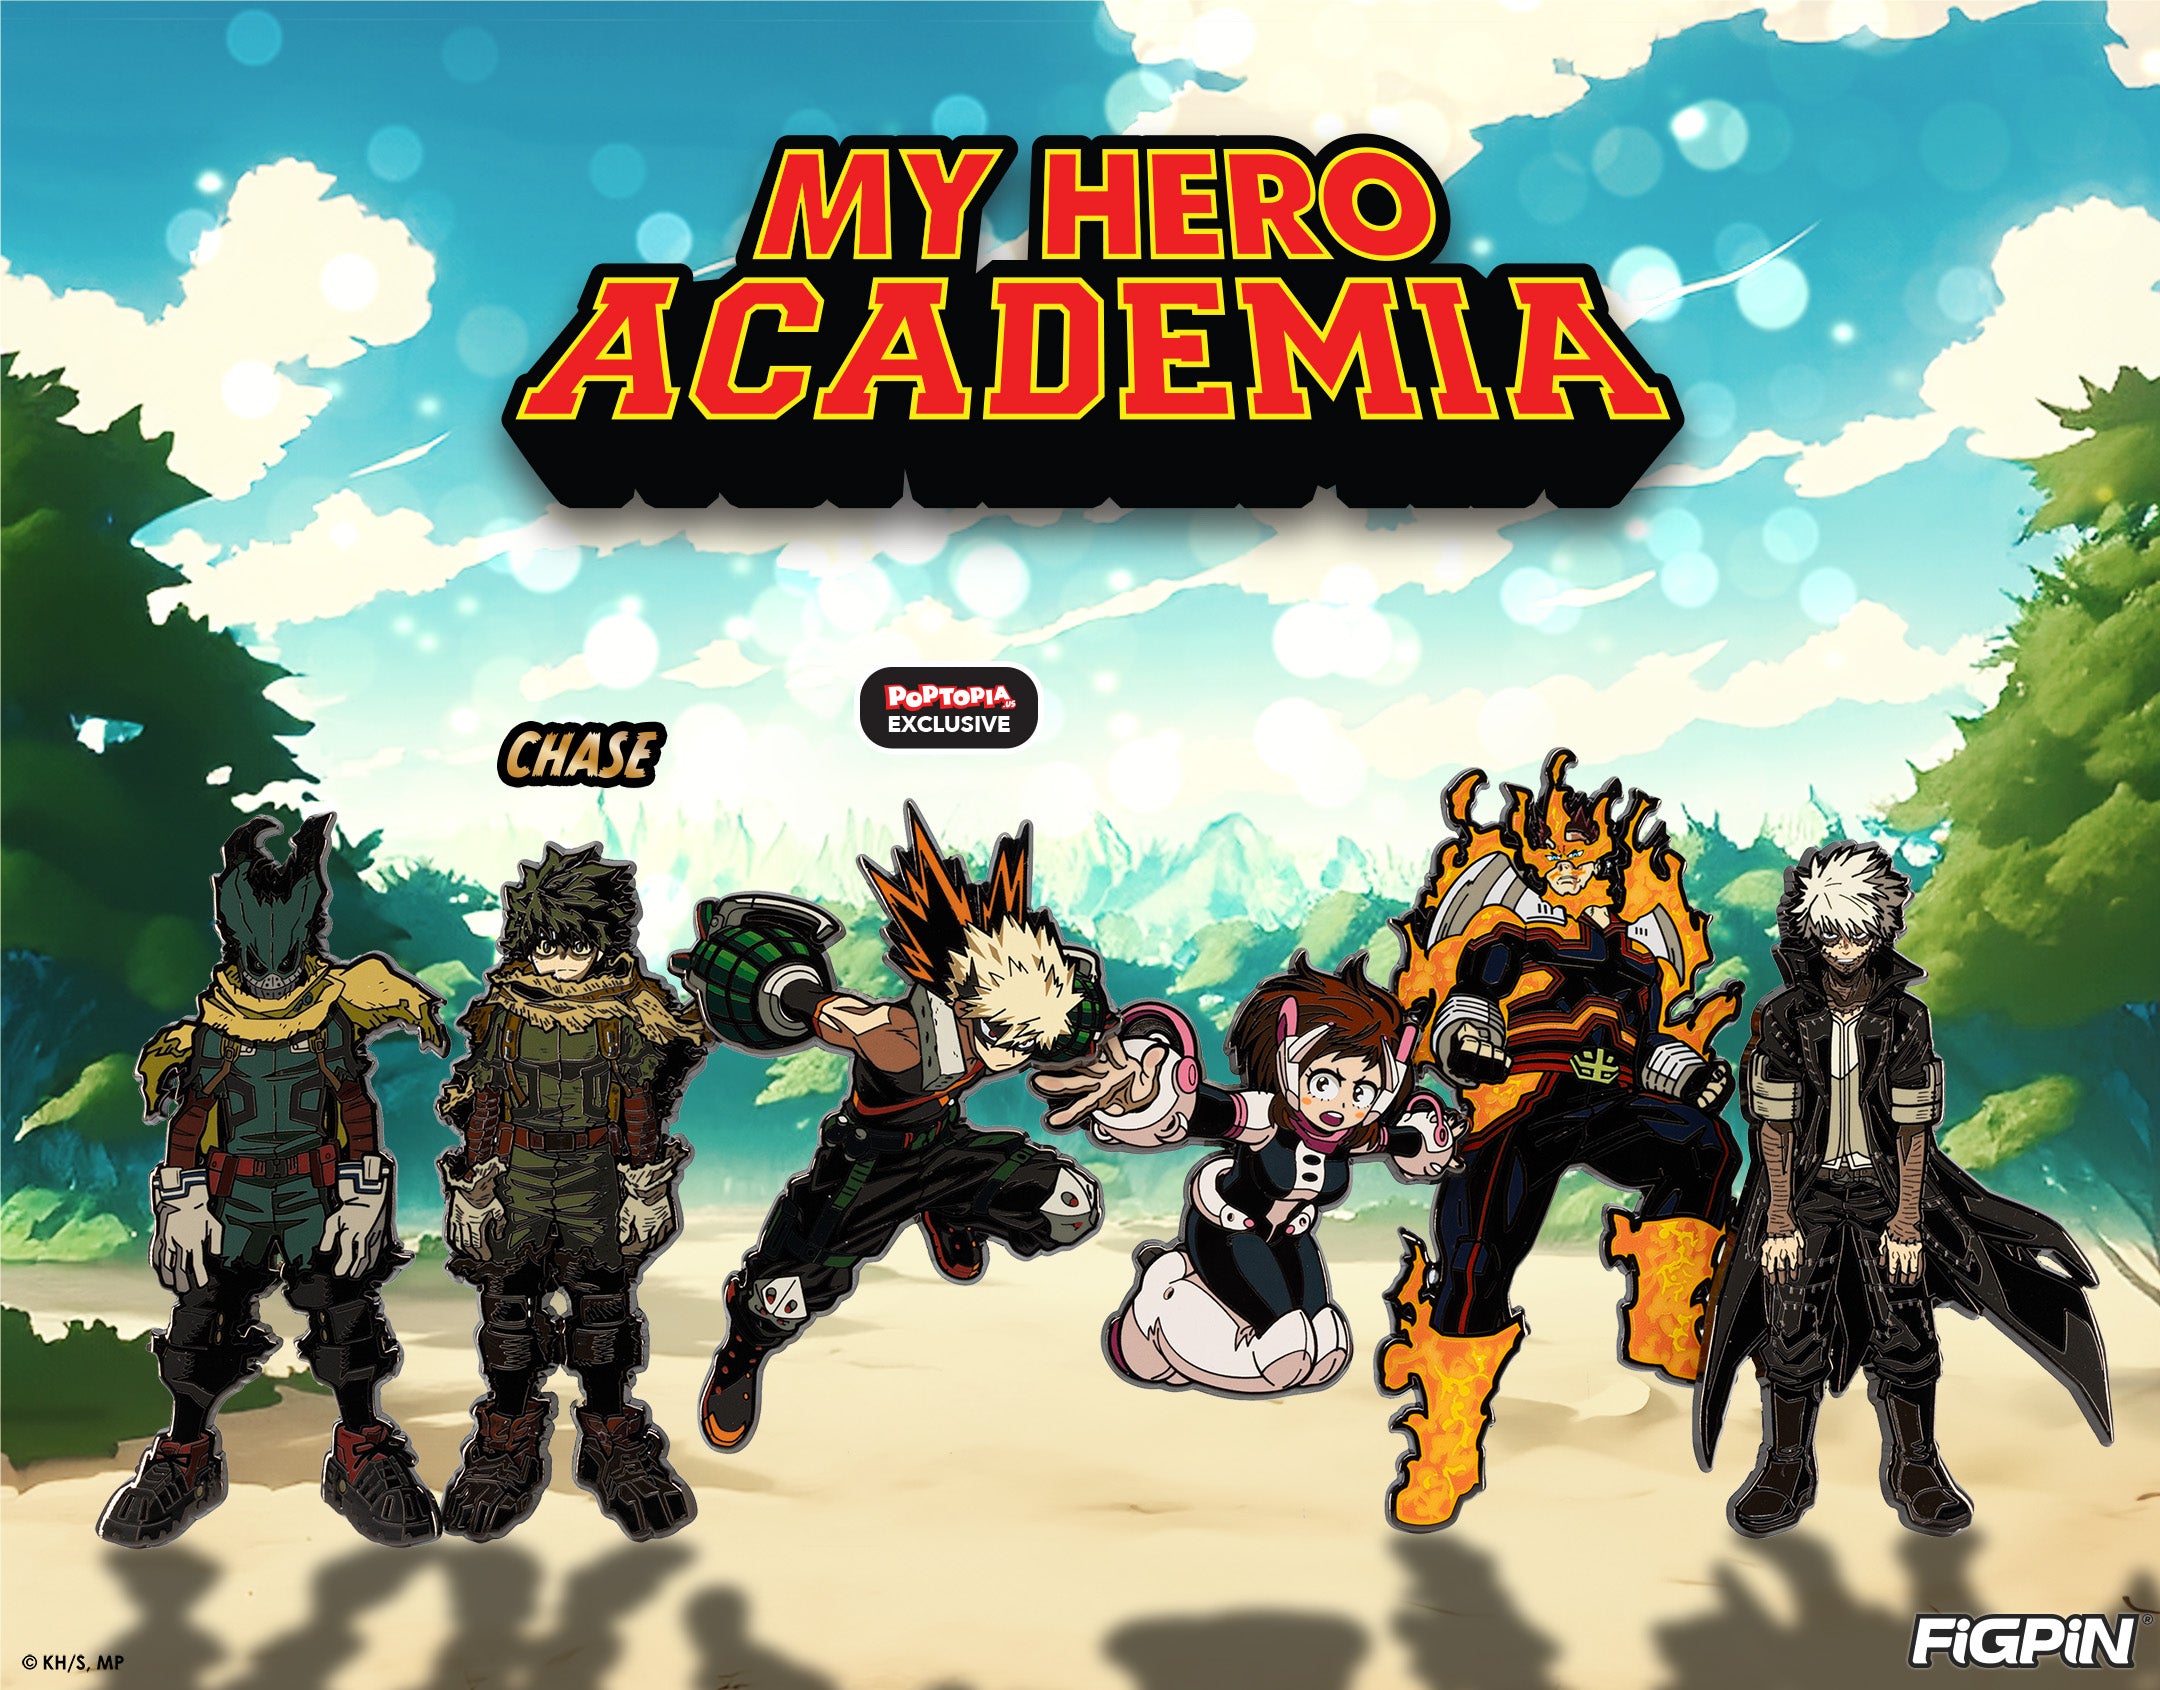 Photograph of My Hero Academia characters available as enamel pins in this My Hero Academia FiGPiN wave release.